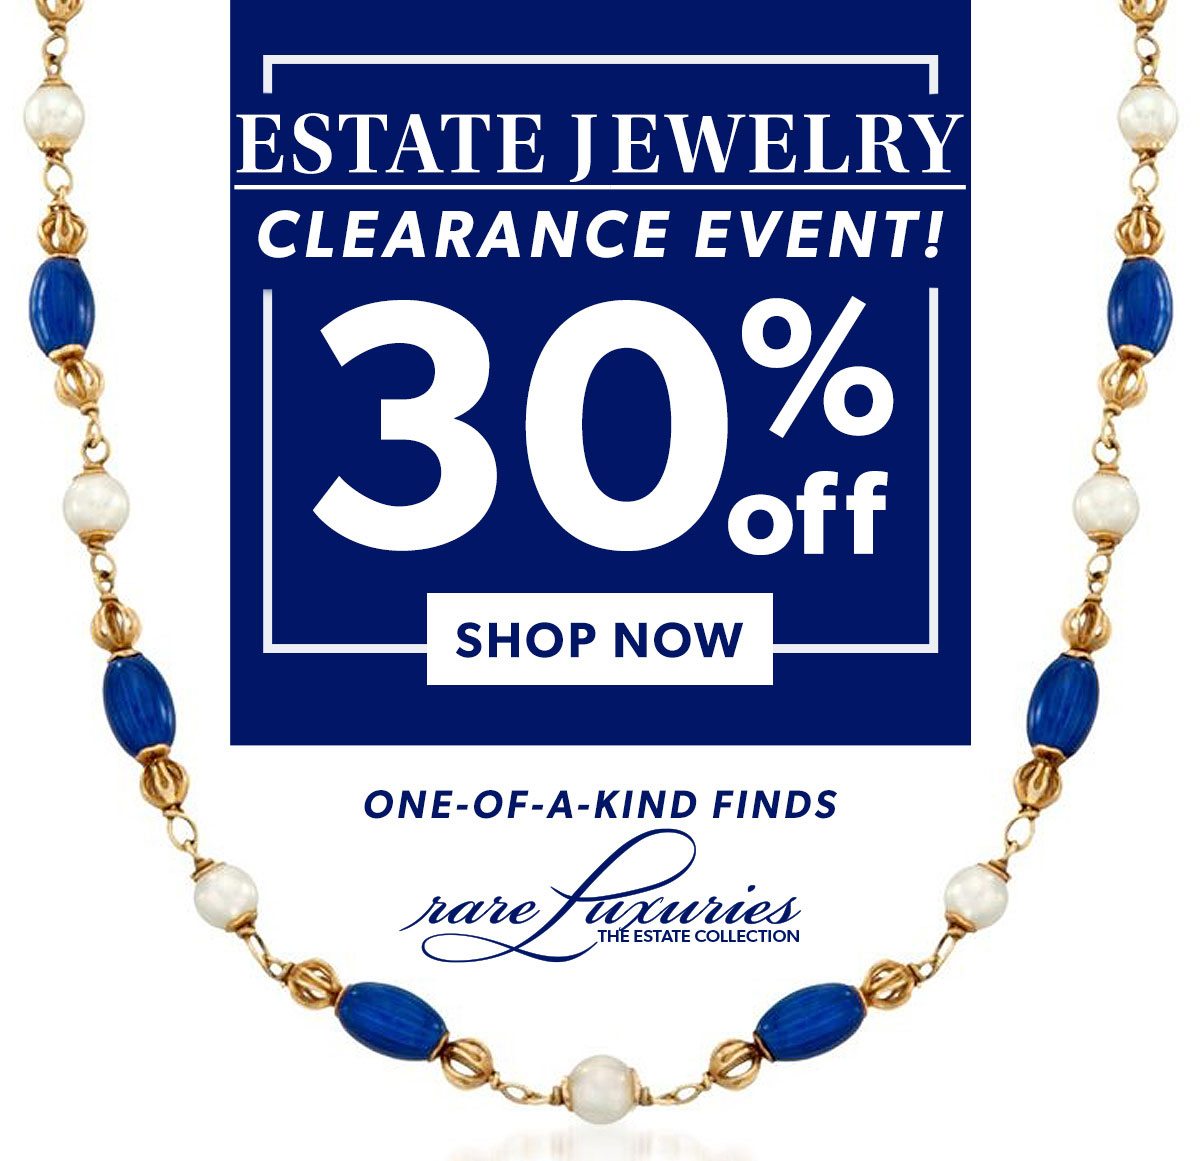 Estate Jewelry Clearance Event!